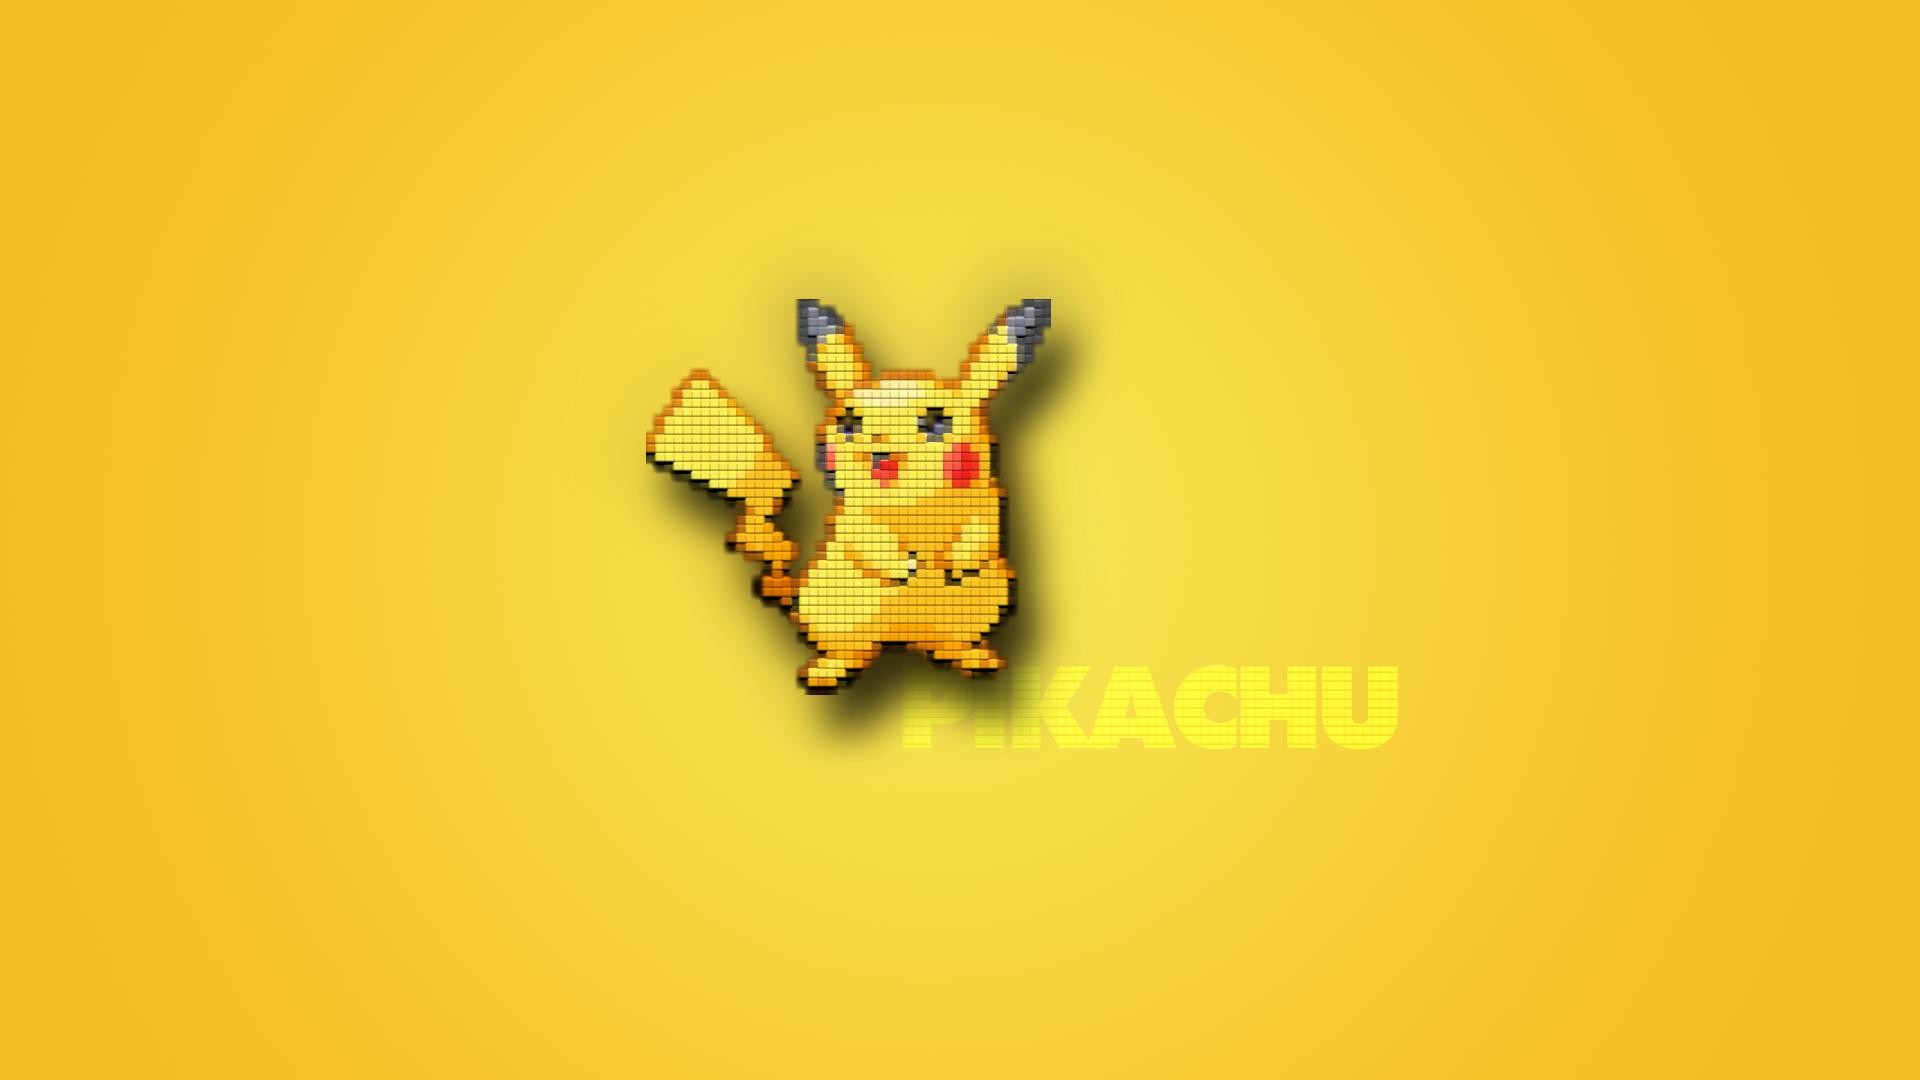 Pikachu wallpaper made by me